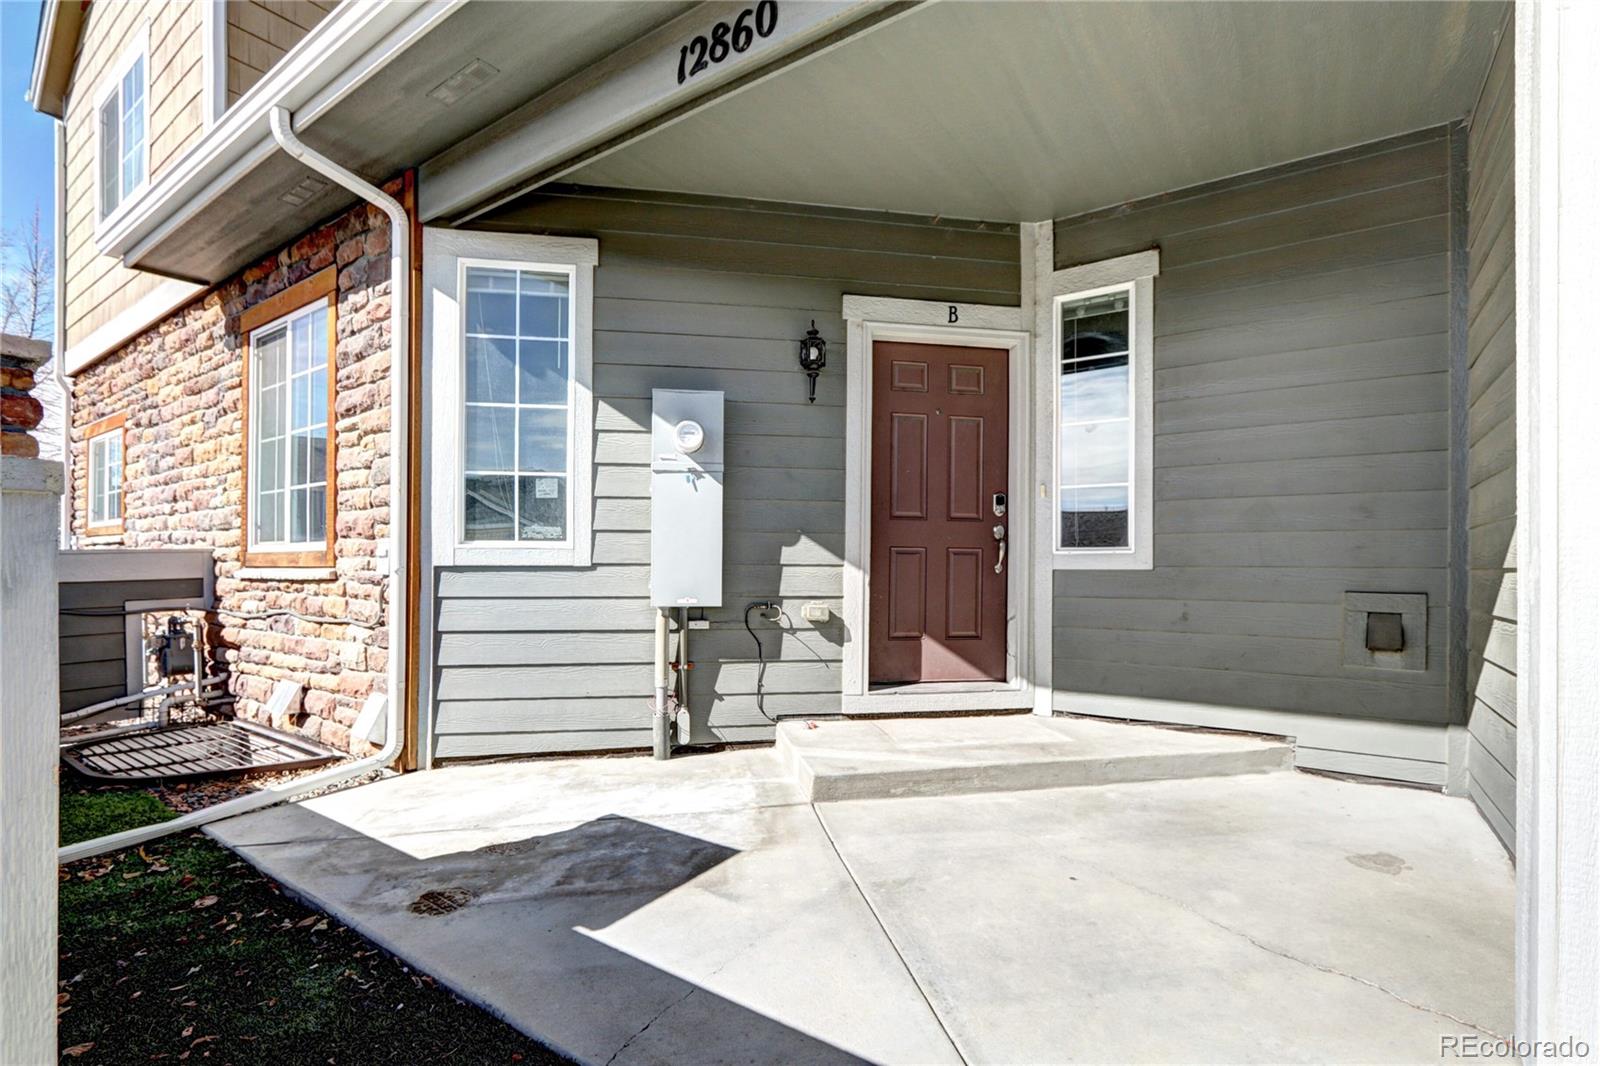 12860  jasmine street, Thornton sold home. Closed on 2024-05-09 for $425,000.